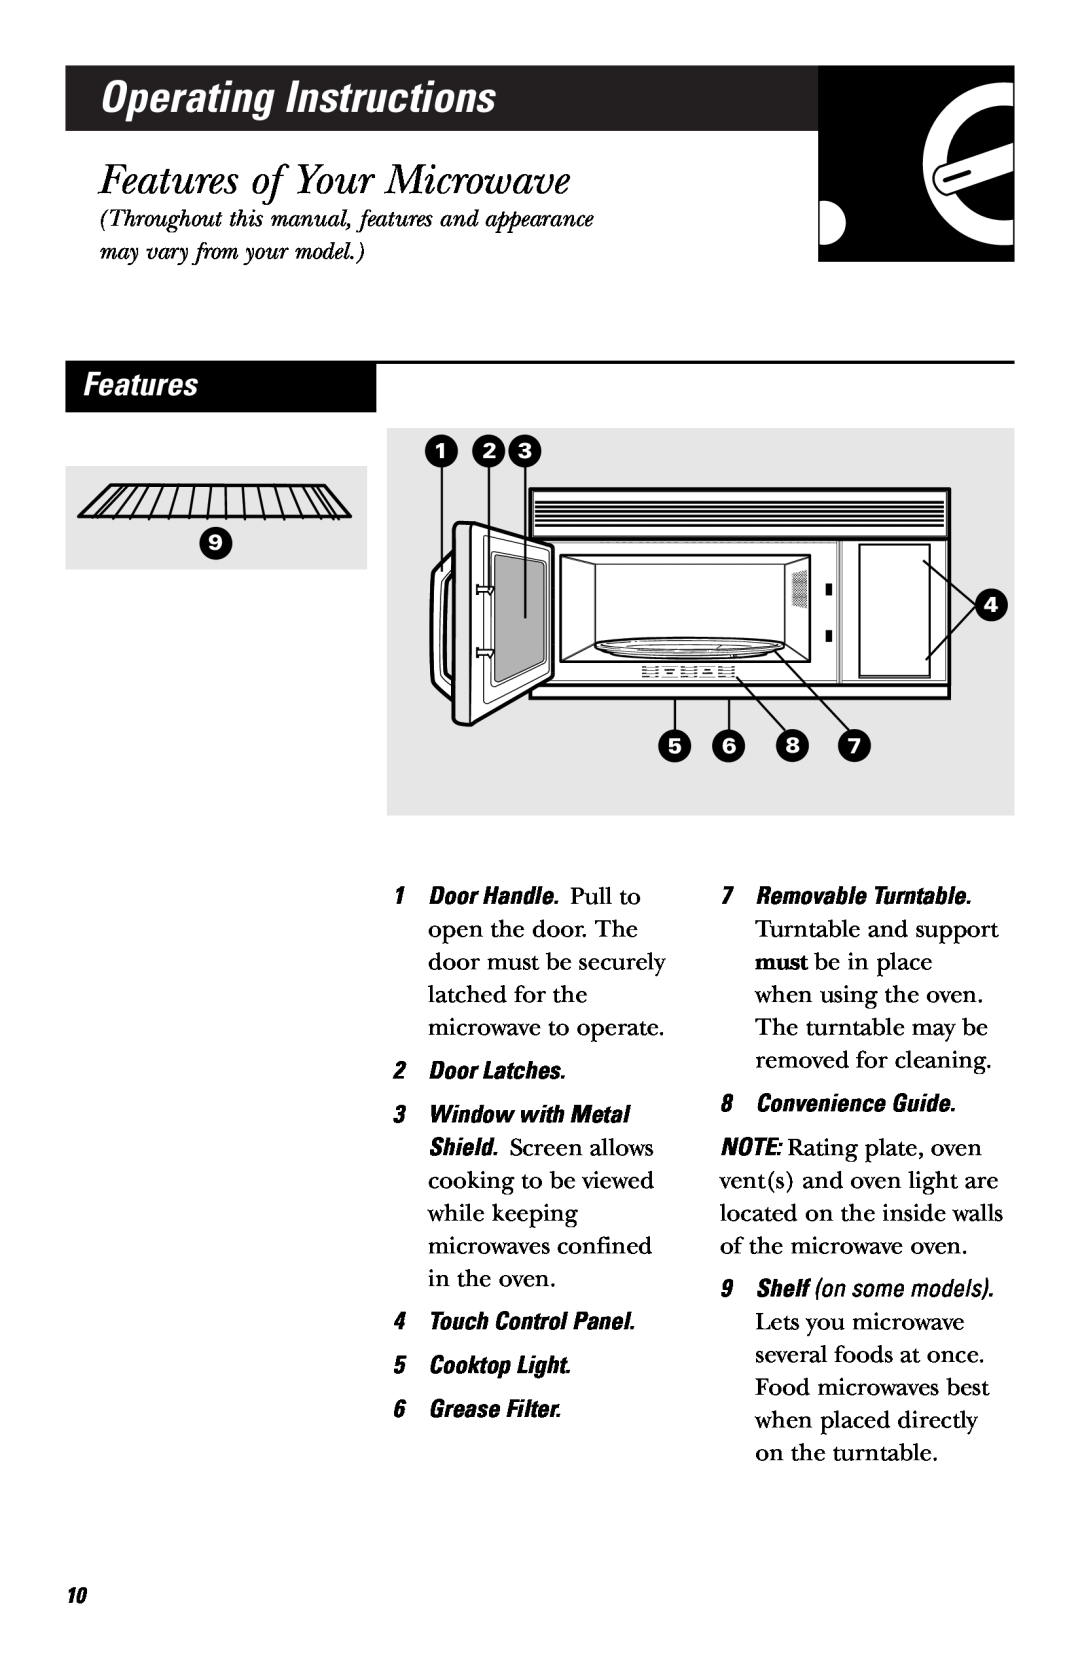 GE JVM1430 Operating Instructions, Features of Your Microwave, 2Door Latches, 4Touch Control Panel 5Cooktop Light 